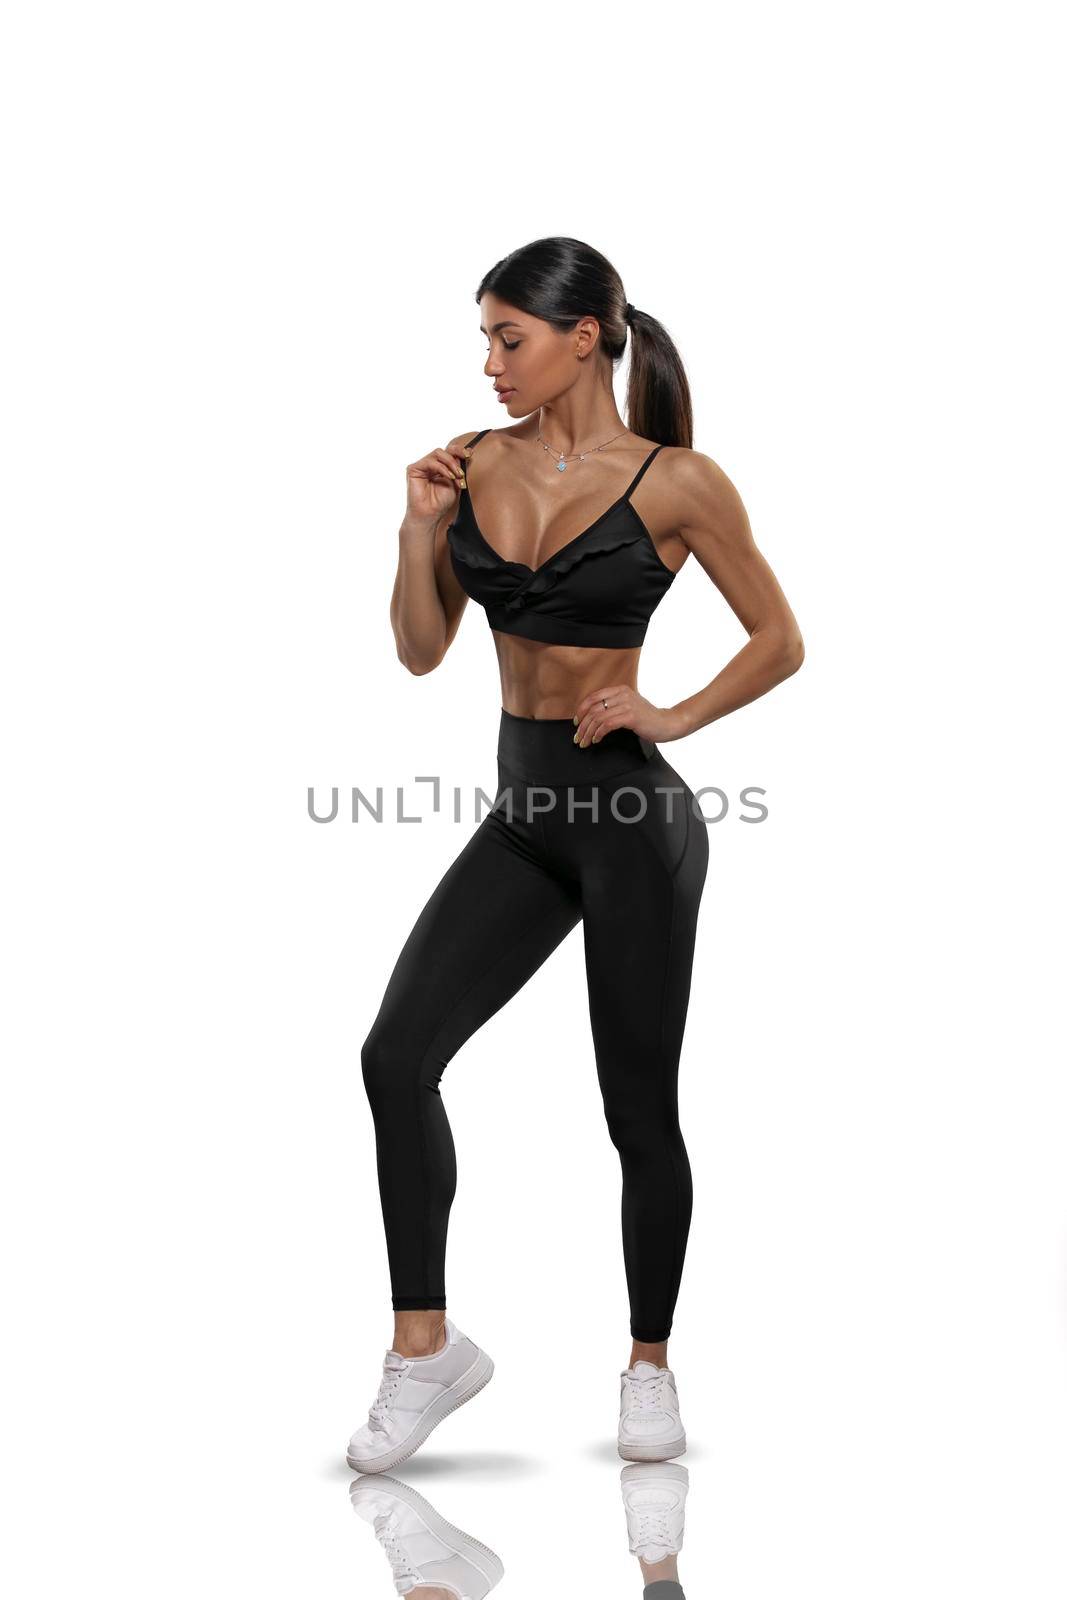 brunette girl in black leggings and a top on a white background